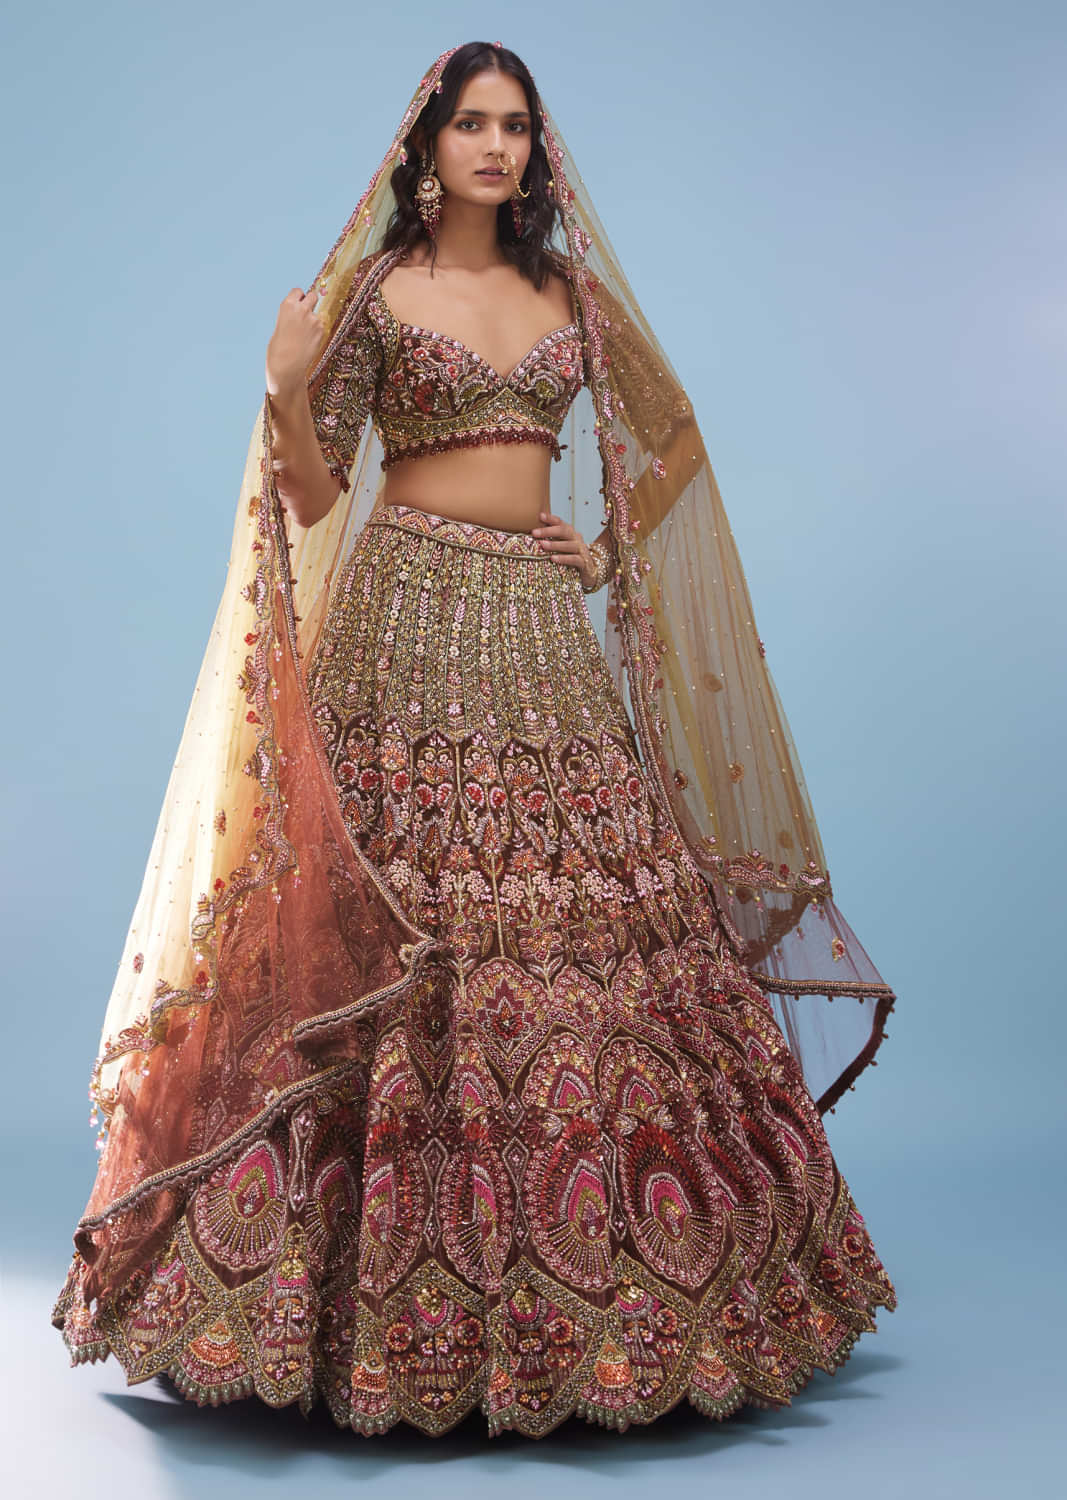 Chocolate Brown Maharani Bridal Lehenga In Velvet With Heavy Floral Embroidery - NOOR 2022